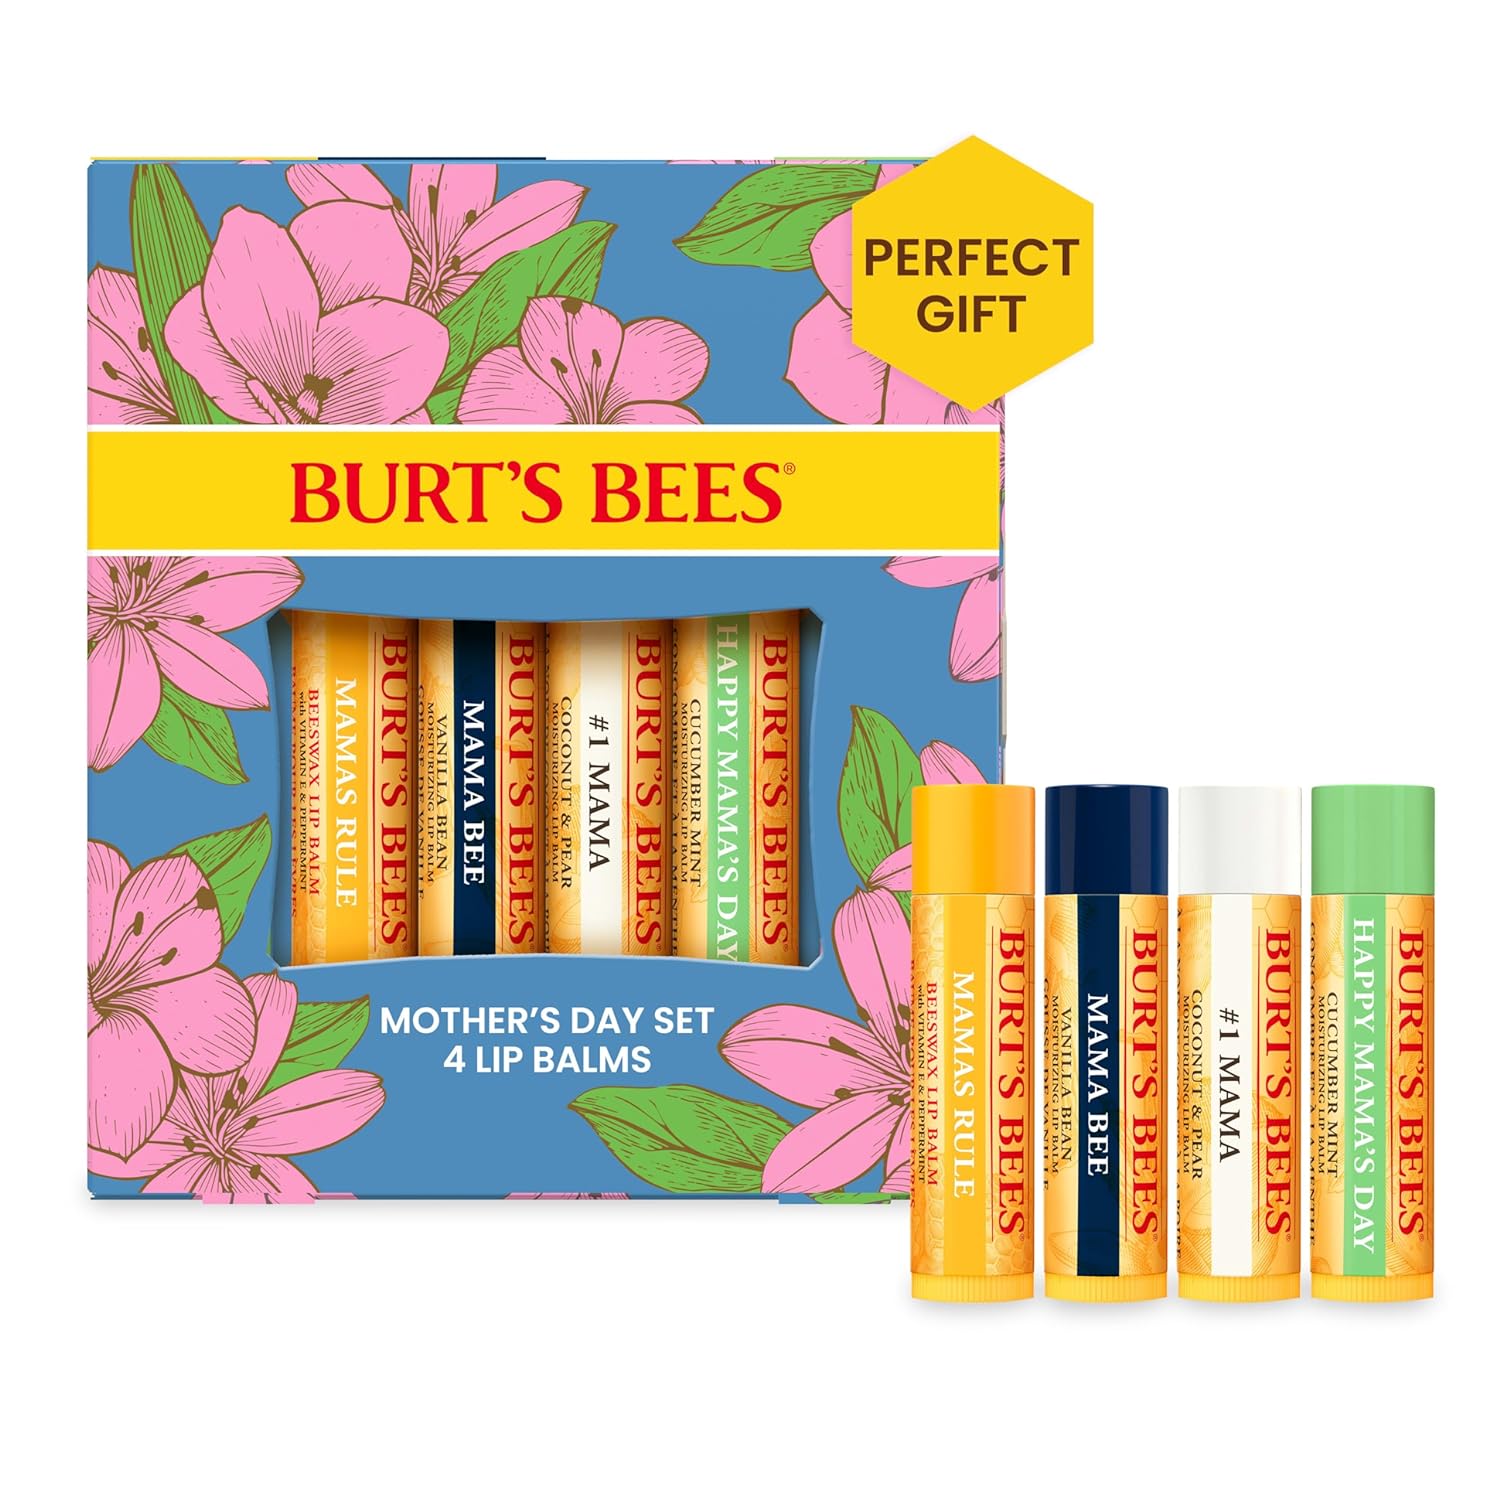 Burt's Bees Lip Balm Mothers Day Gifts for Mom - Balm Bouquet Set, Original Beeswax, Vanilla Bean, Cucumber Mint, Coconut & Pear Pack, Natural Origin Lip Treatment With Beeswax, 4 Tubes, 0.15 oz